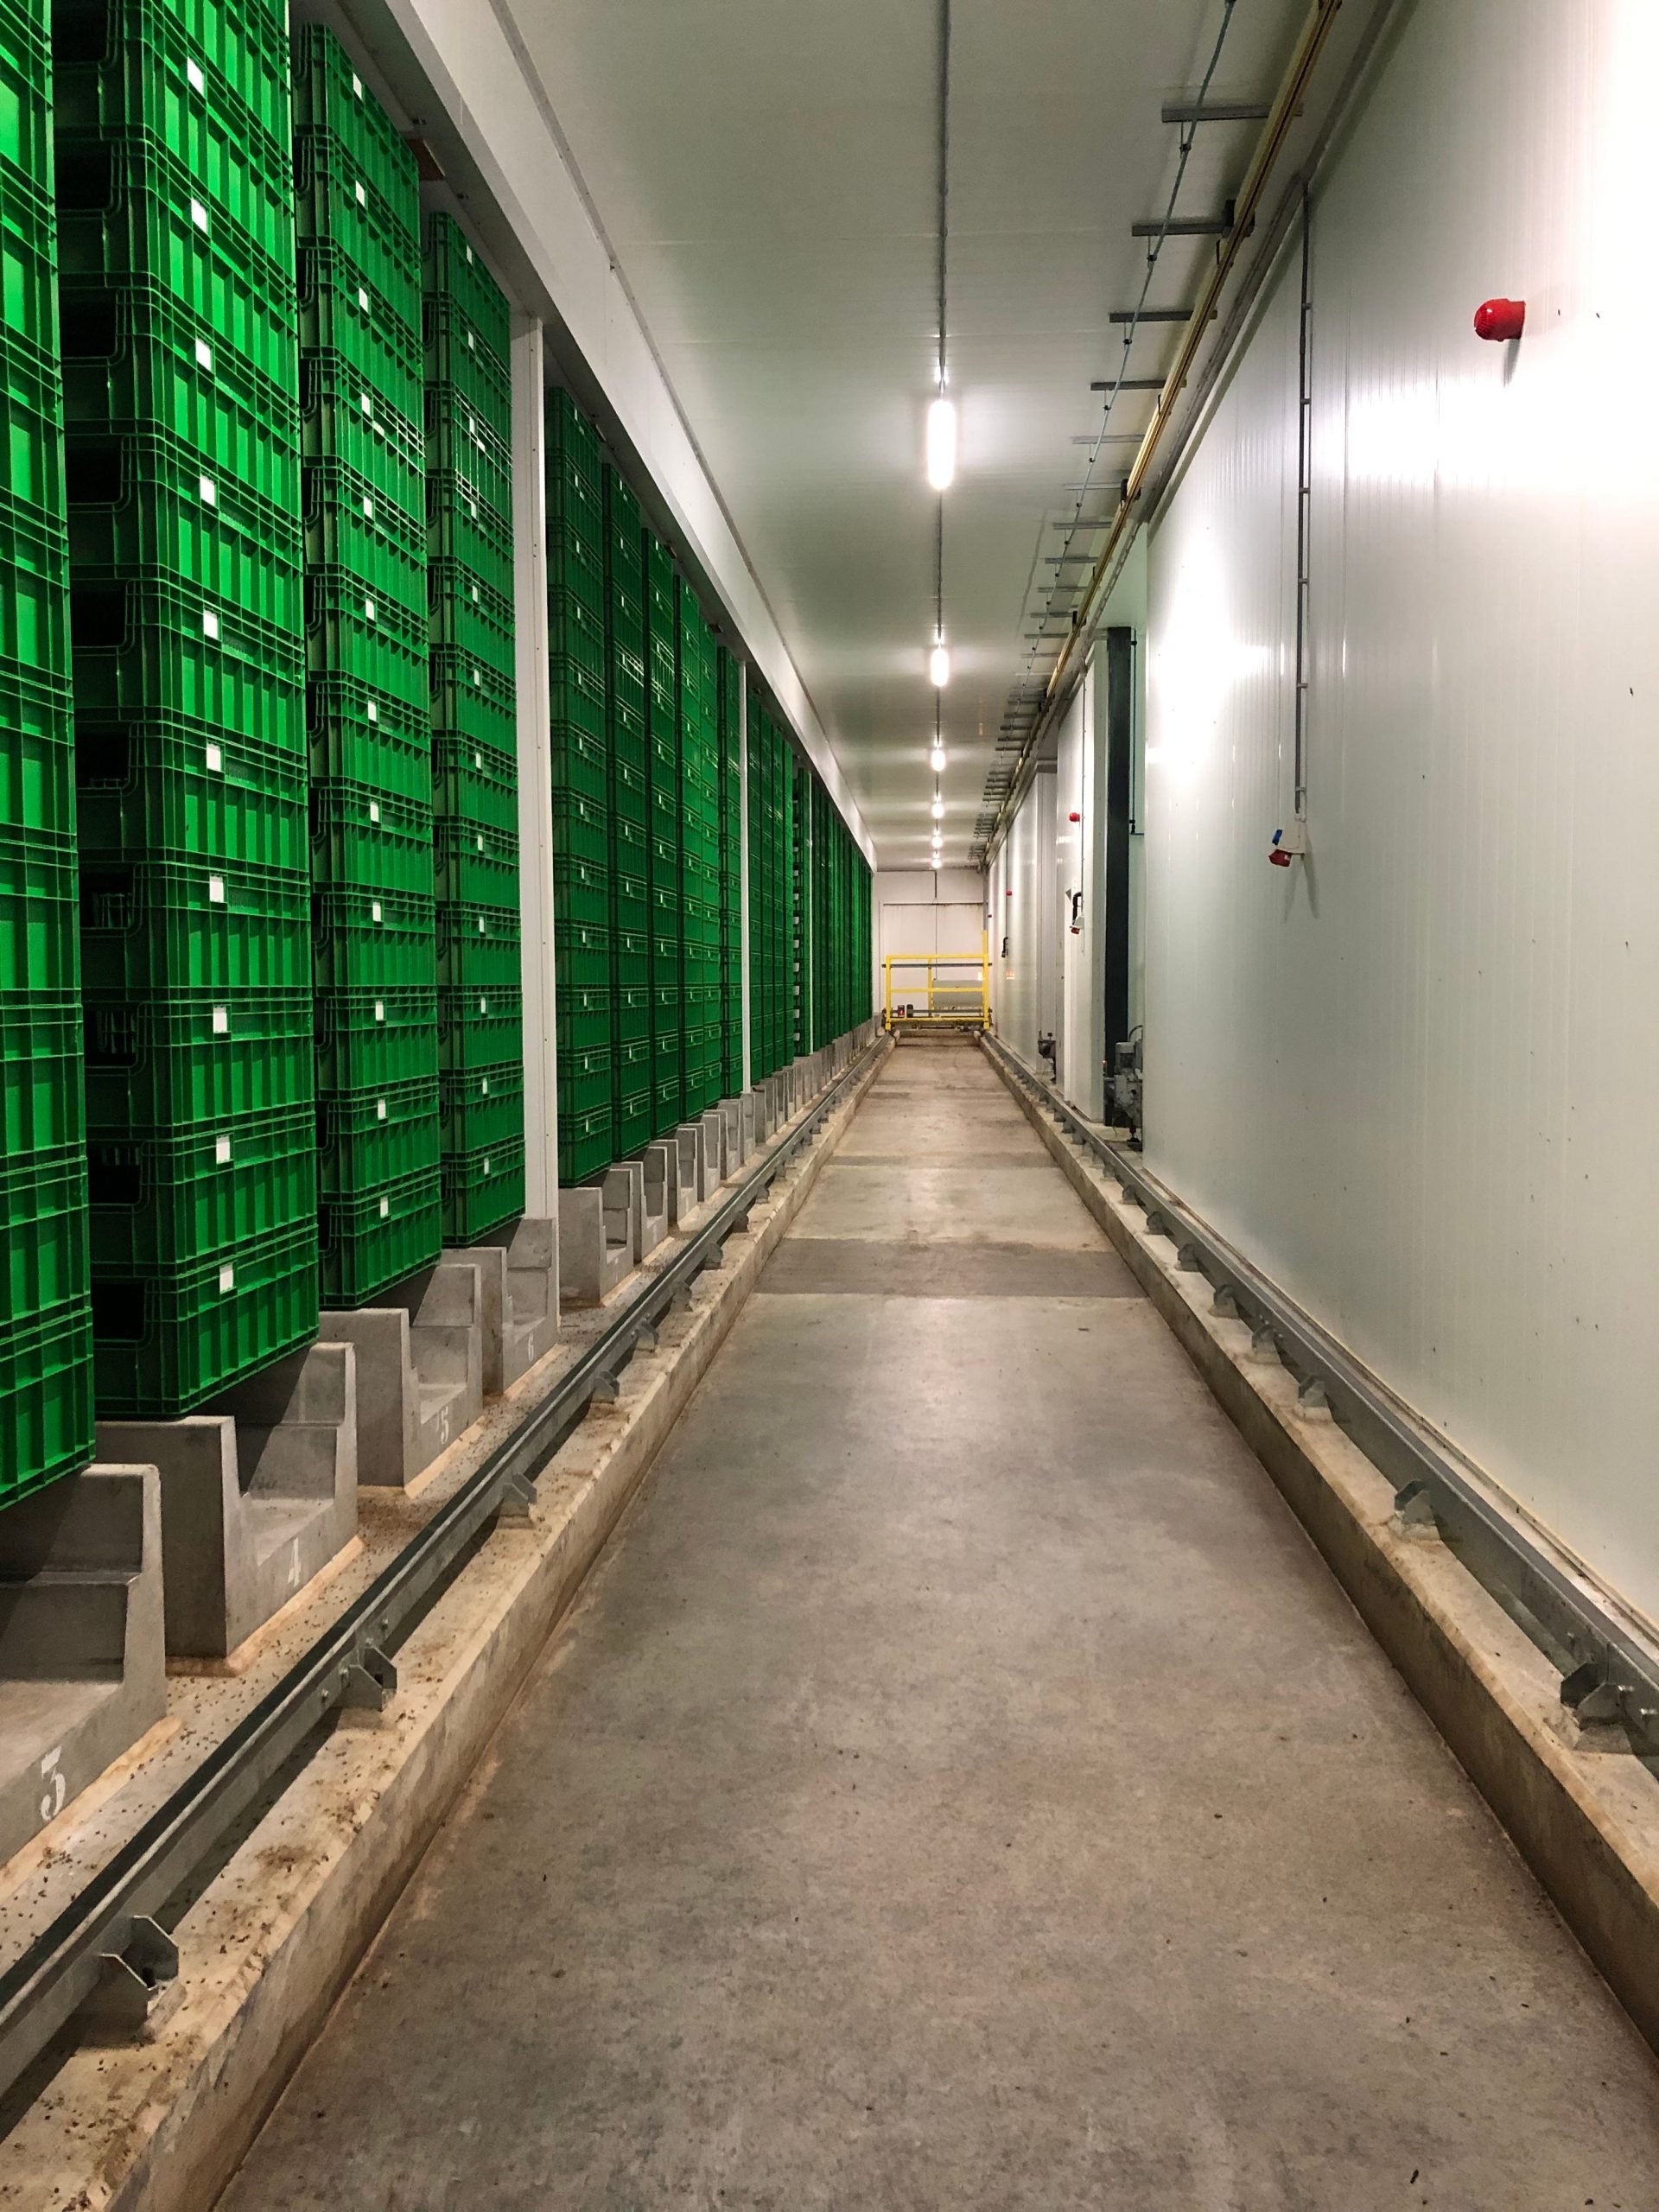 Vertical stacks of crates alongside one side of a long indoor corridor